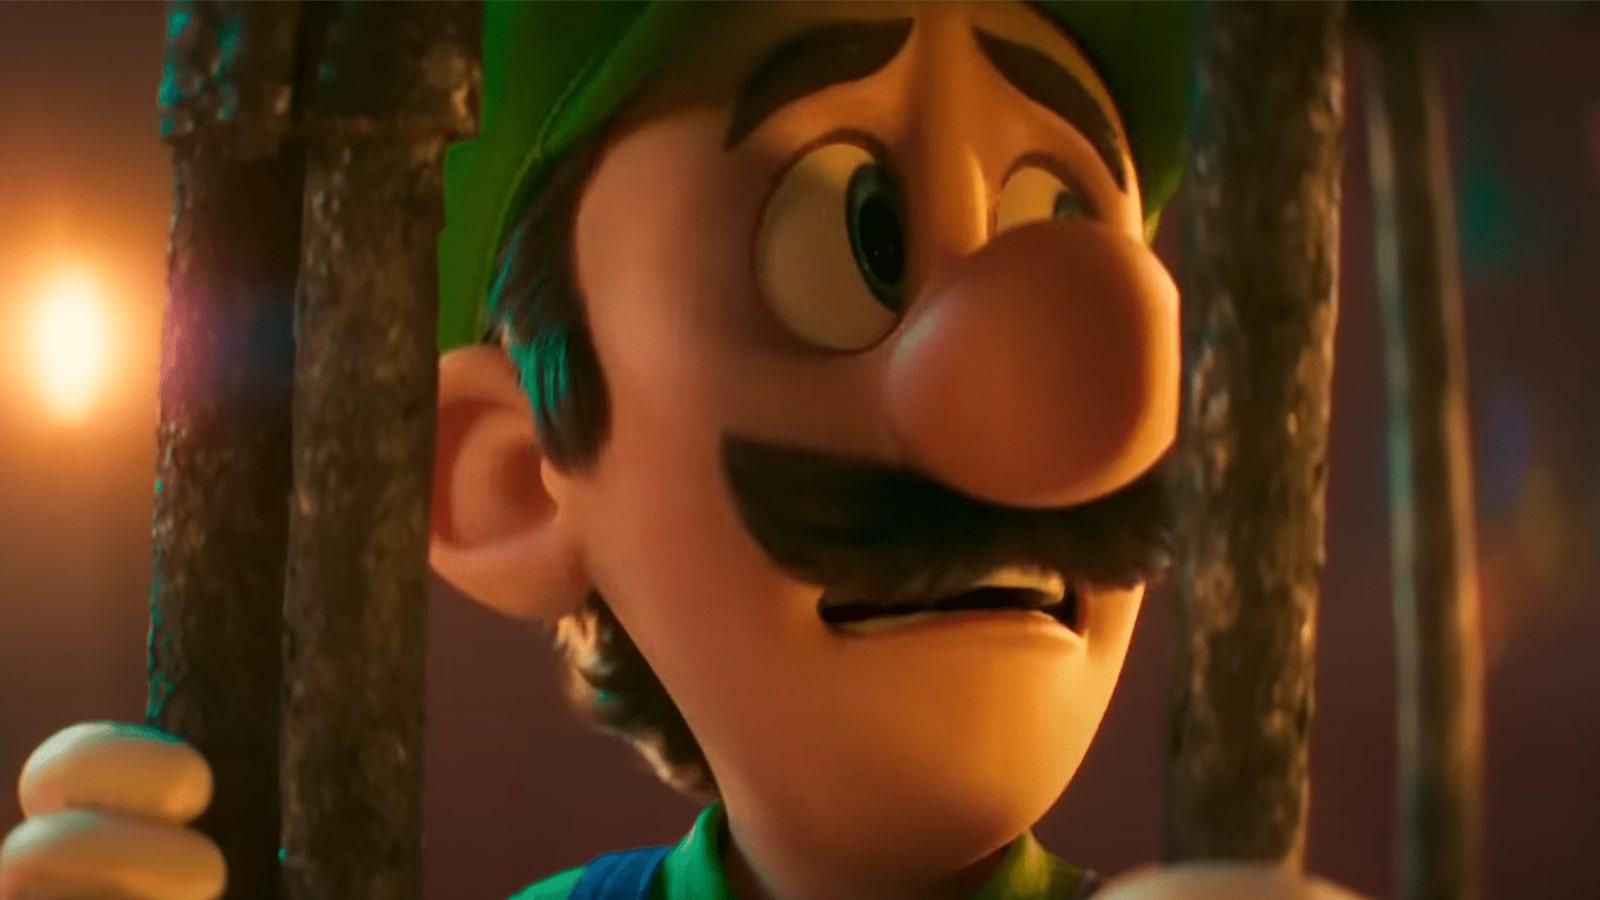 Luigi spin-off movie seemingly in the works after Super Mario Bros